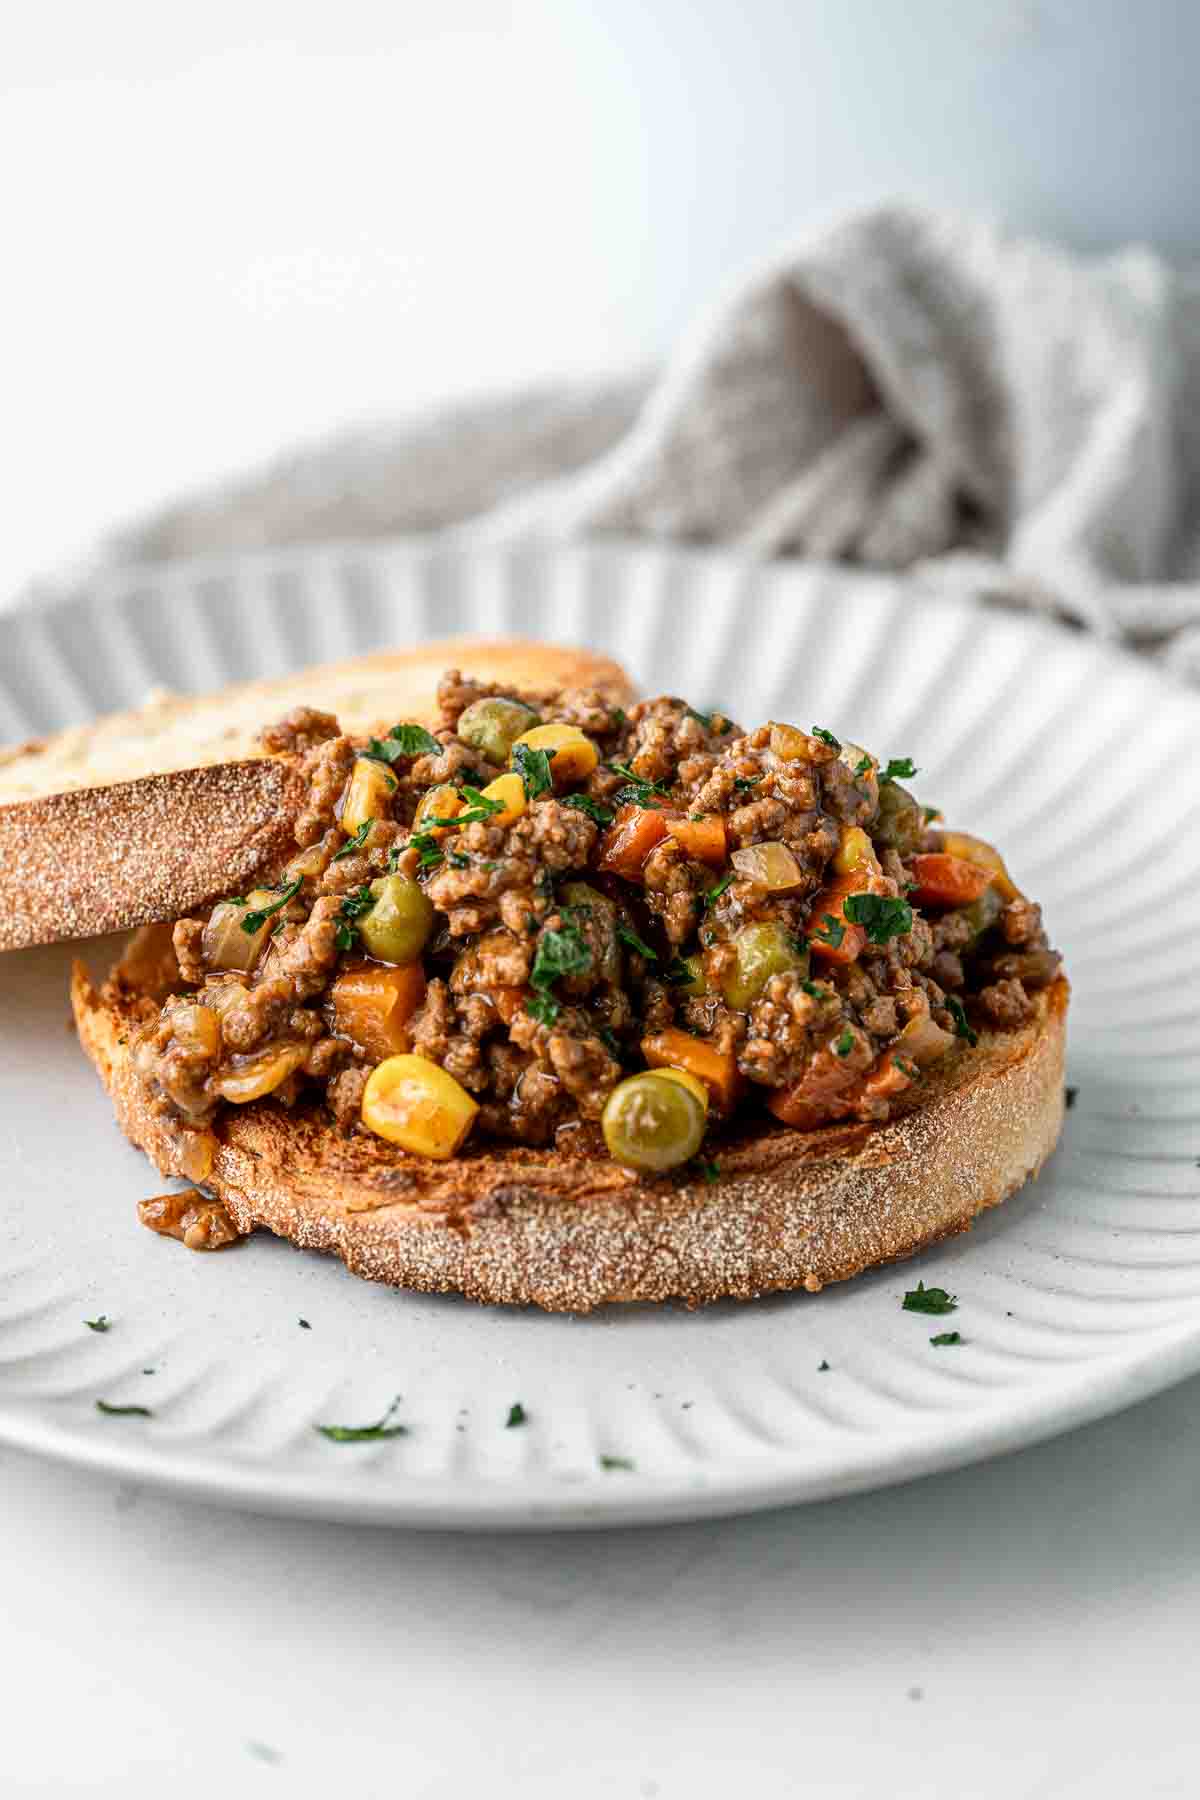 Savoury mince on toast with parsley on a white plate.